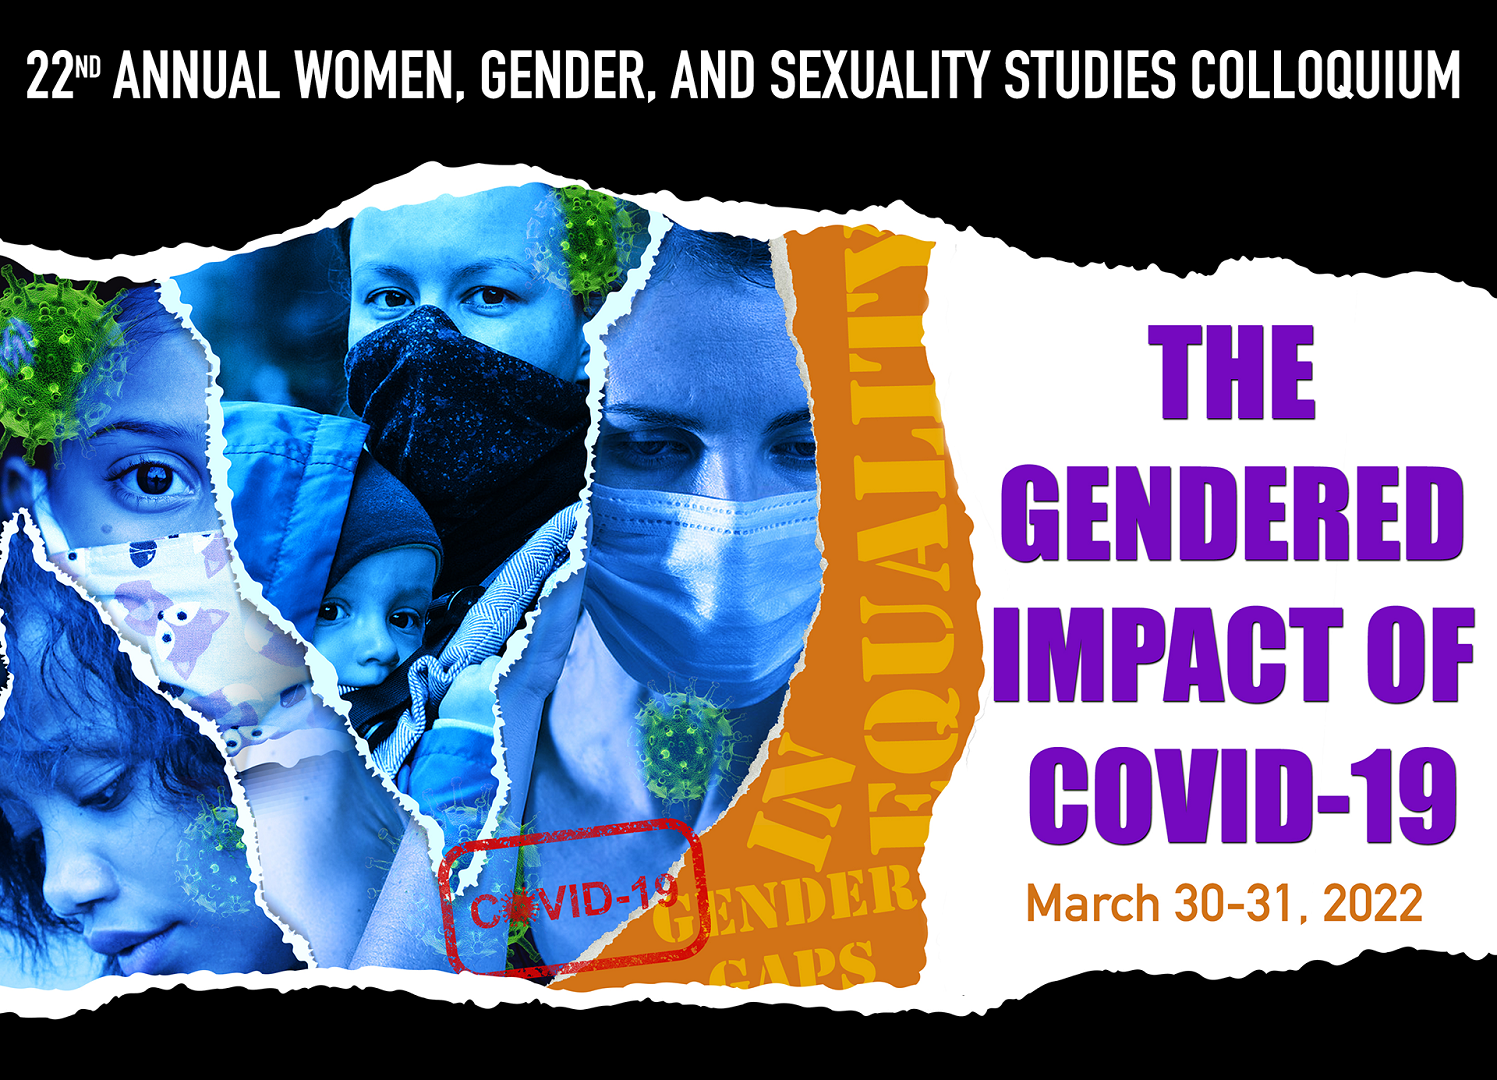 The Gendered Impact of Covid-19